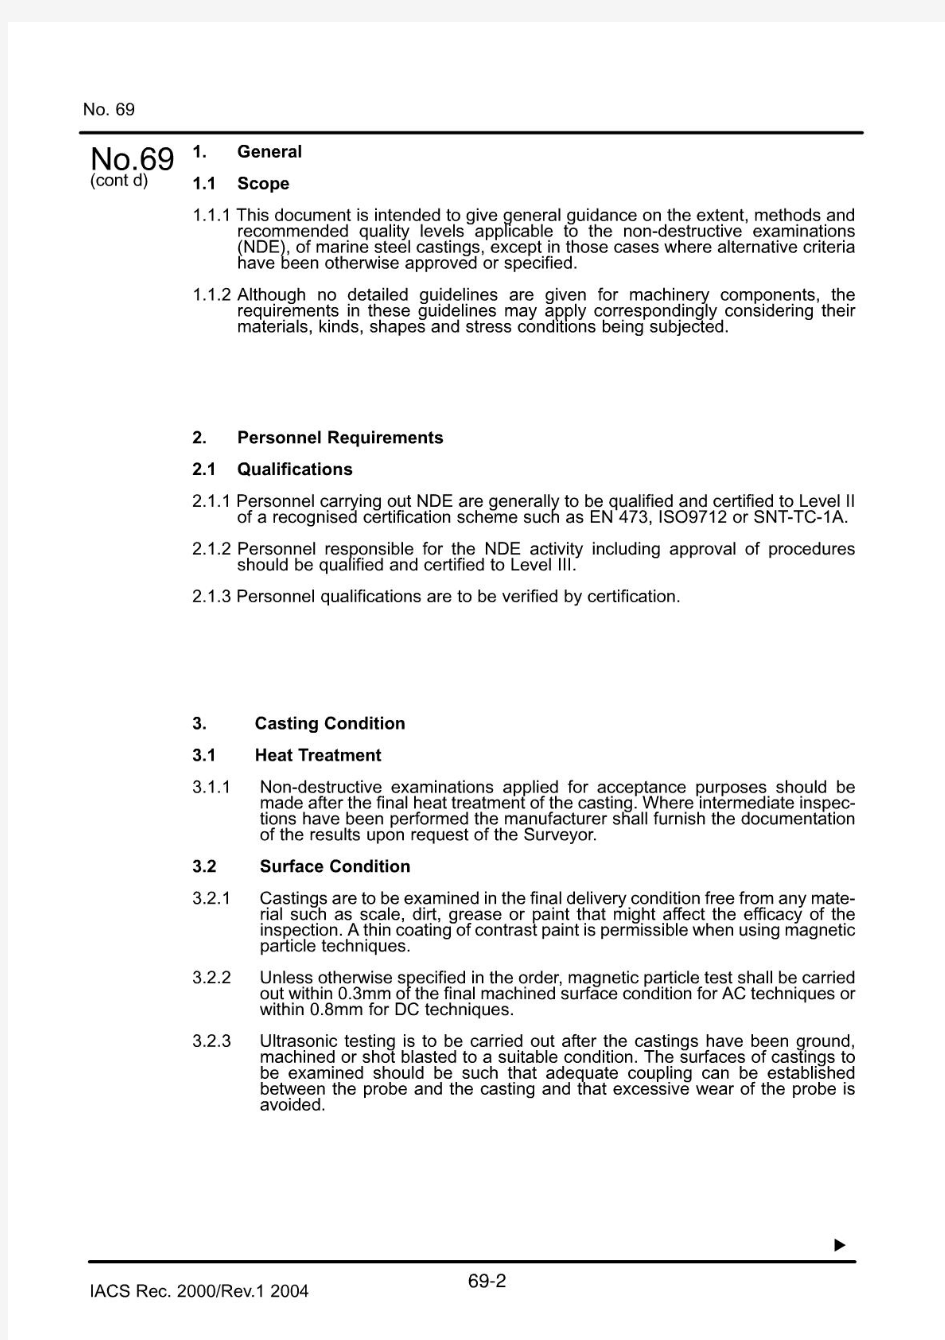 IACS No69 Guidelines for non-destructive examination of marine steel castings(船用铸钢件无损检测)